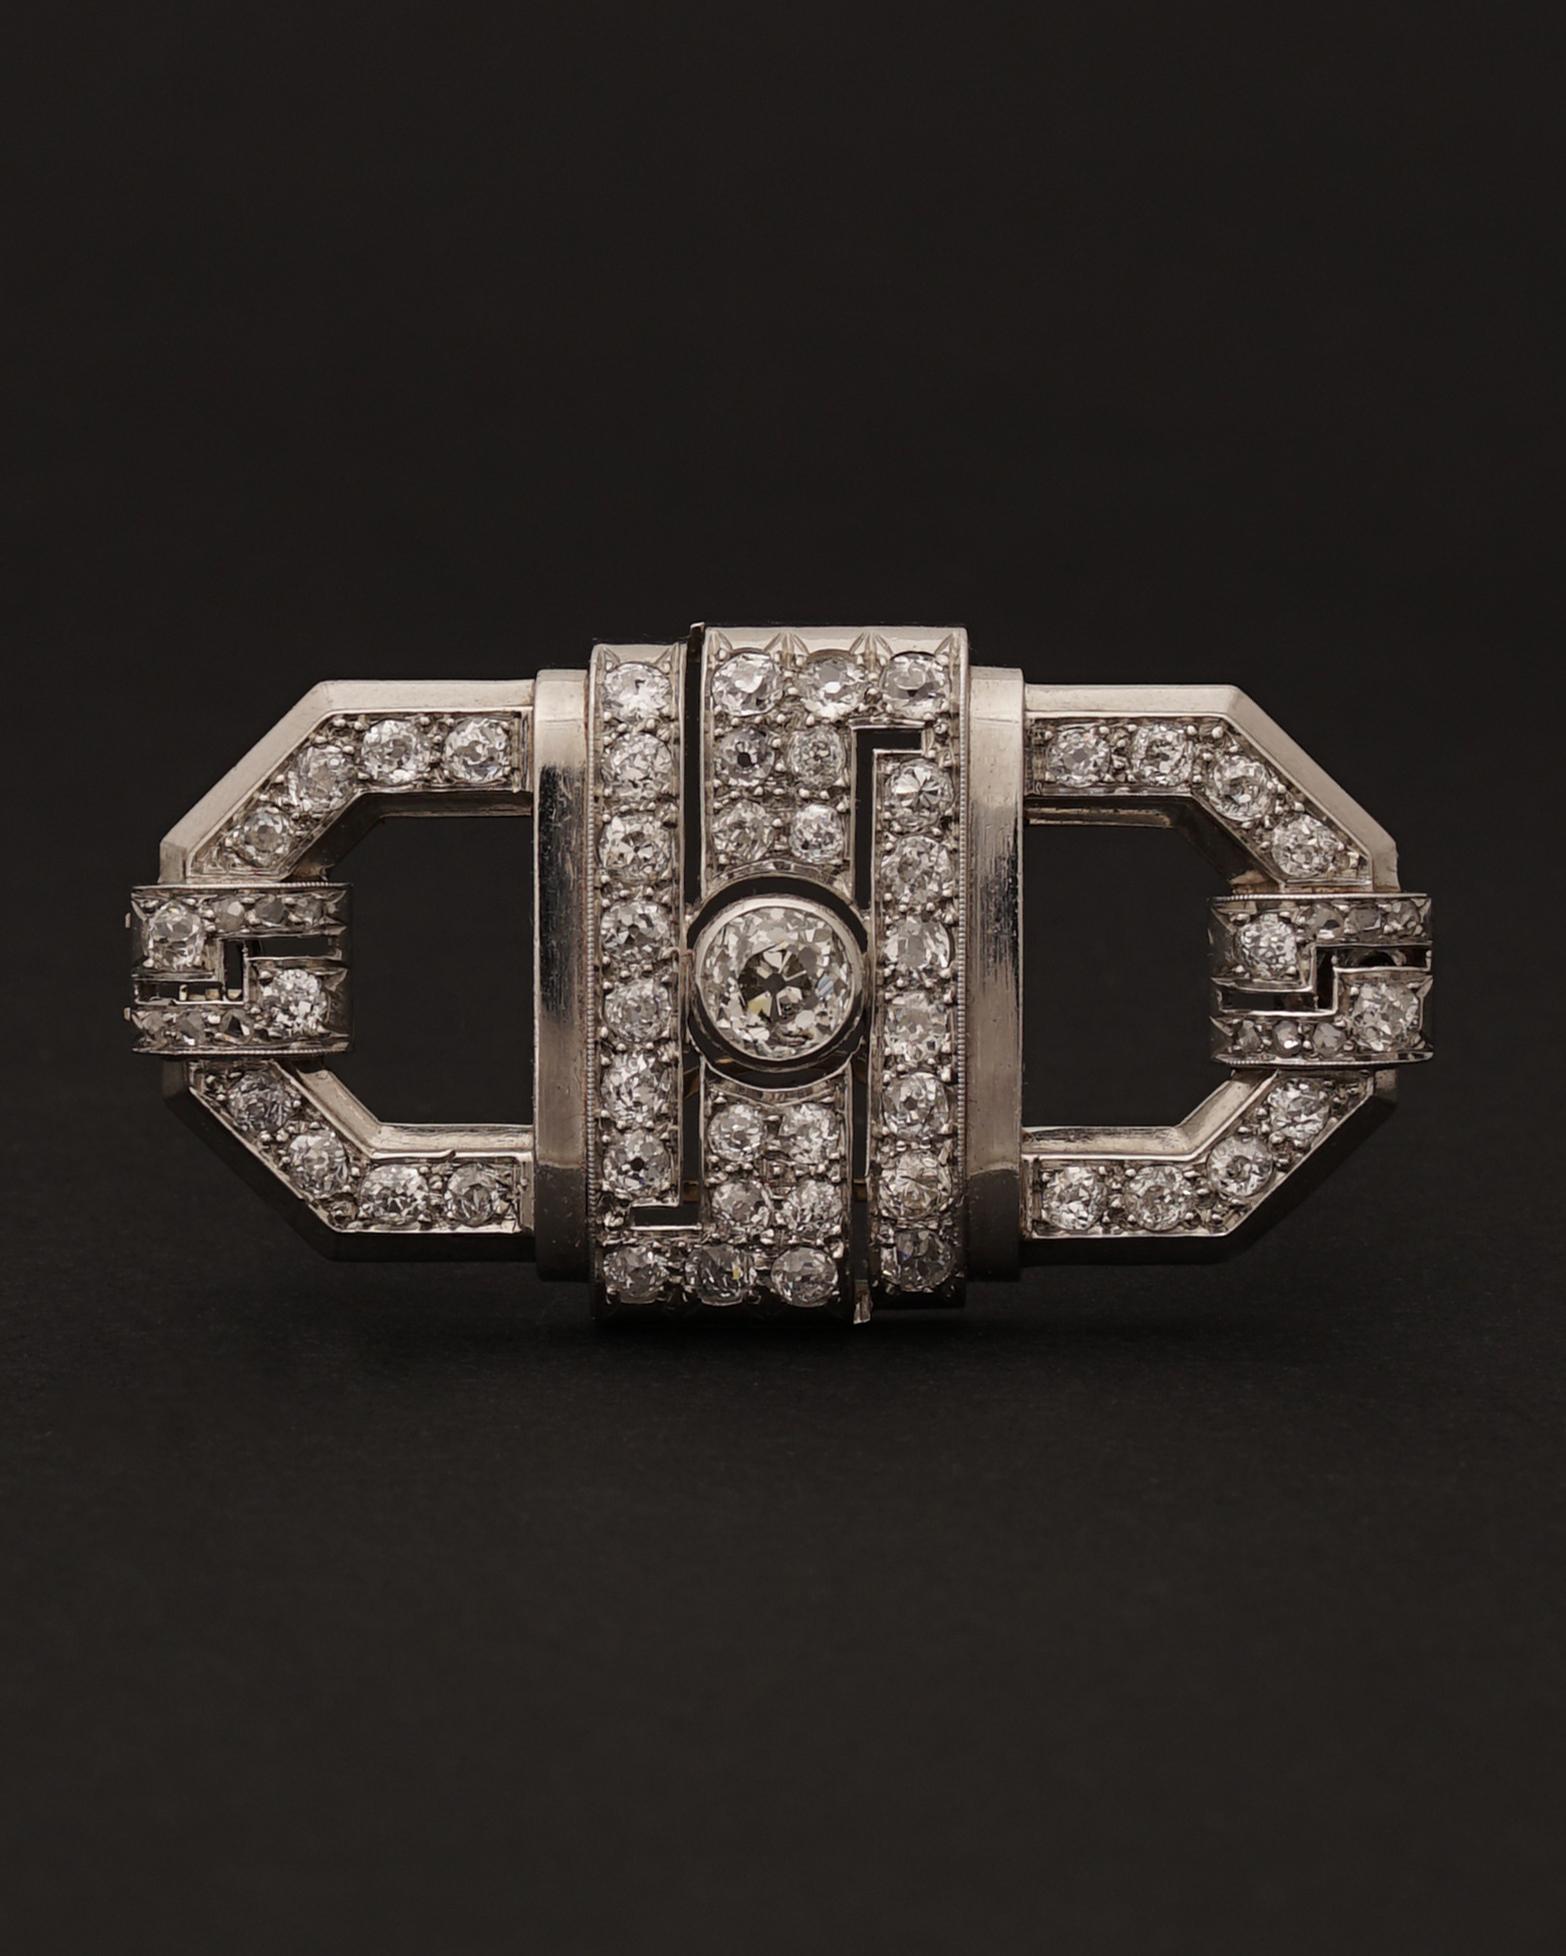 Beautiful French Art Deco 18ct White Gold and Diamond Brooch, C. 1930
Of Geometric asymmetric design, set with a center Old Round Cut Diamond (I/L - I2) and 48 diamonds for a total of 5,76 cts.
Numbered, Maker's mark partially erased (see